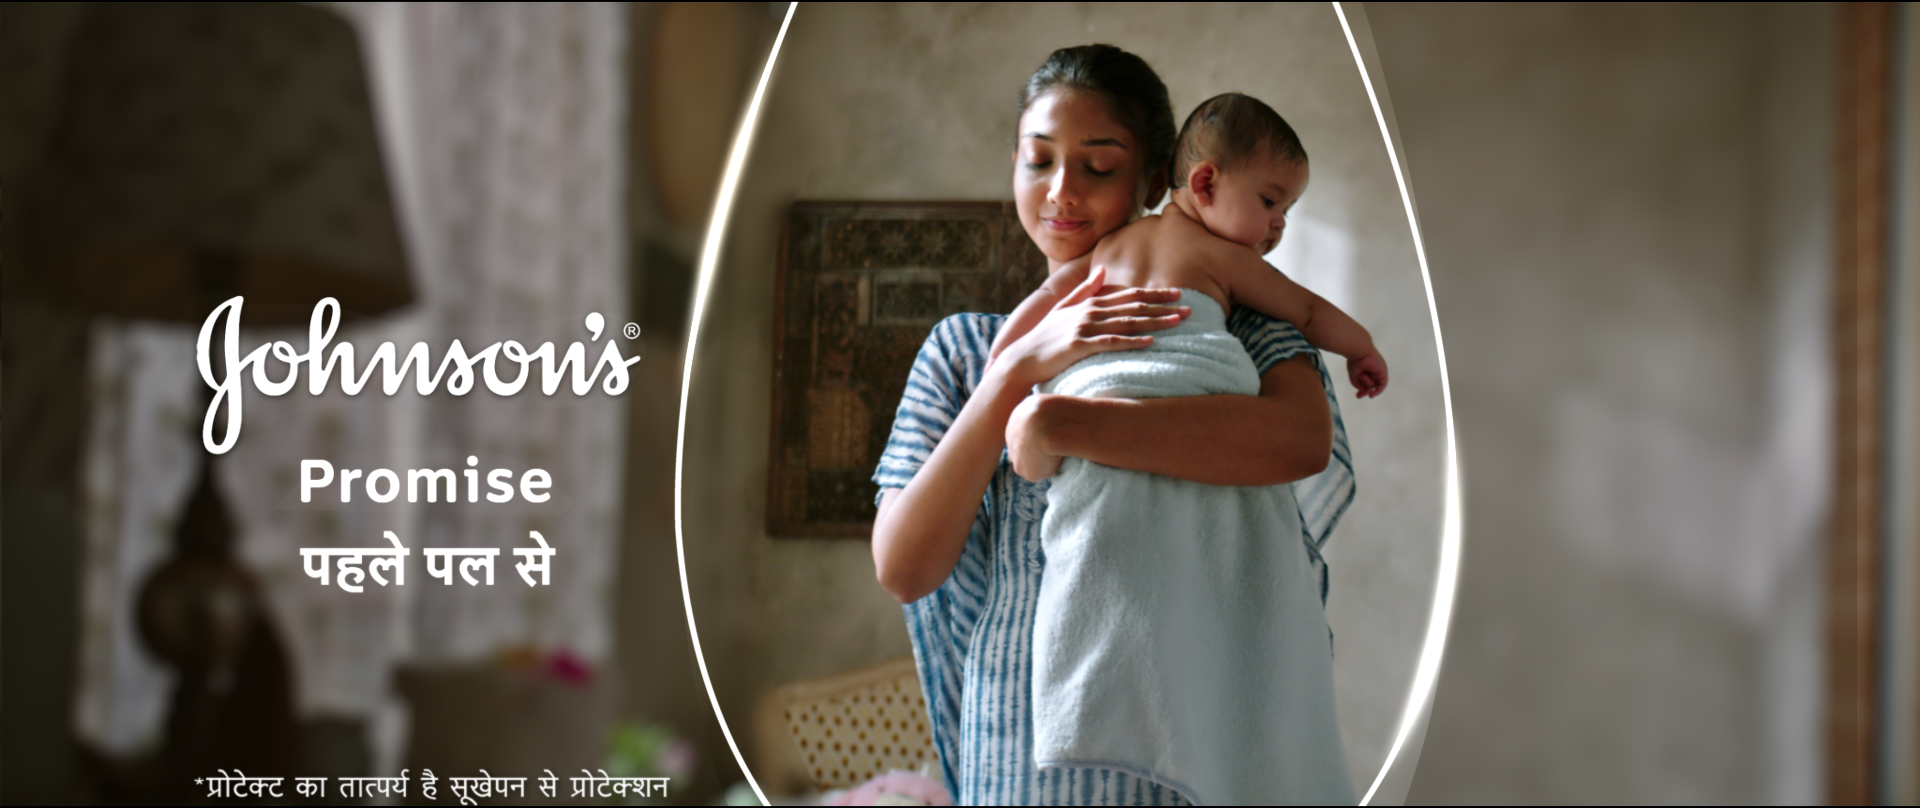 Embracing every mum's biggest promise, Johnson's® Baby commits to help protect, pehle pal se